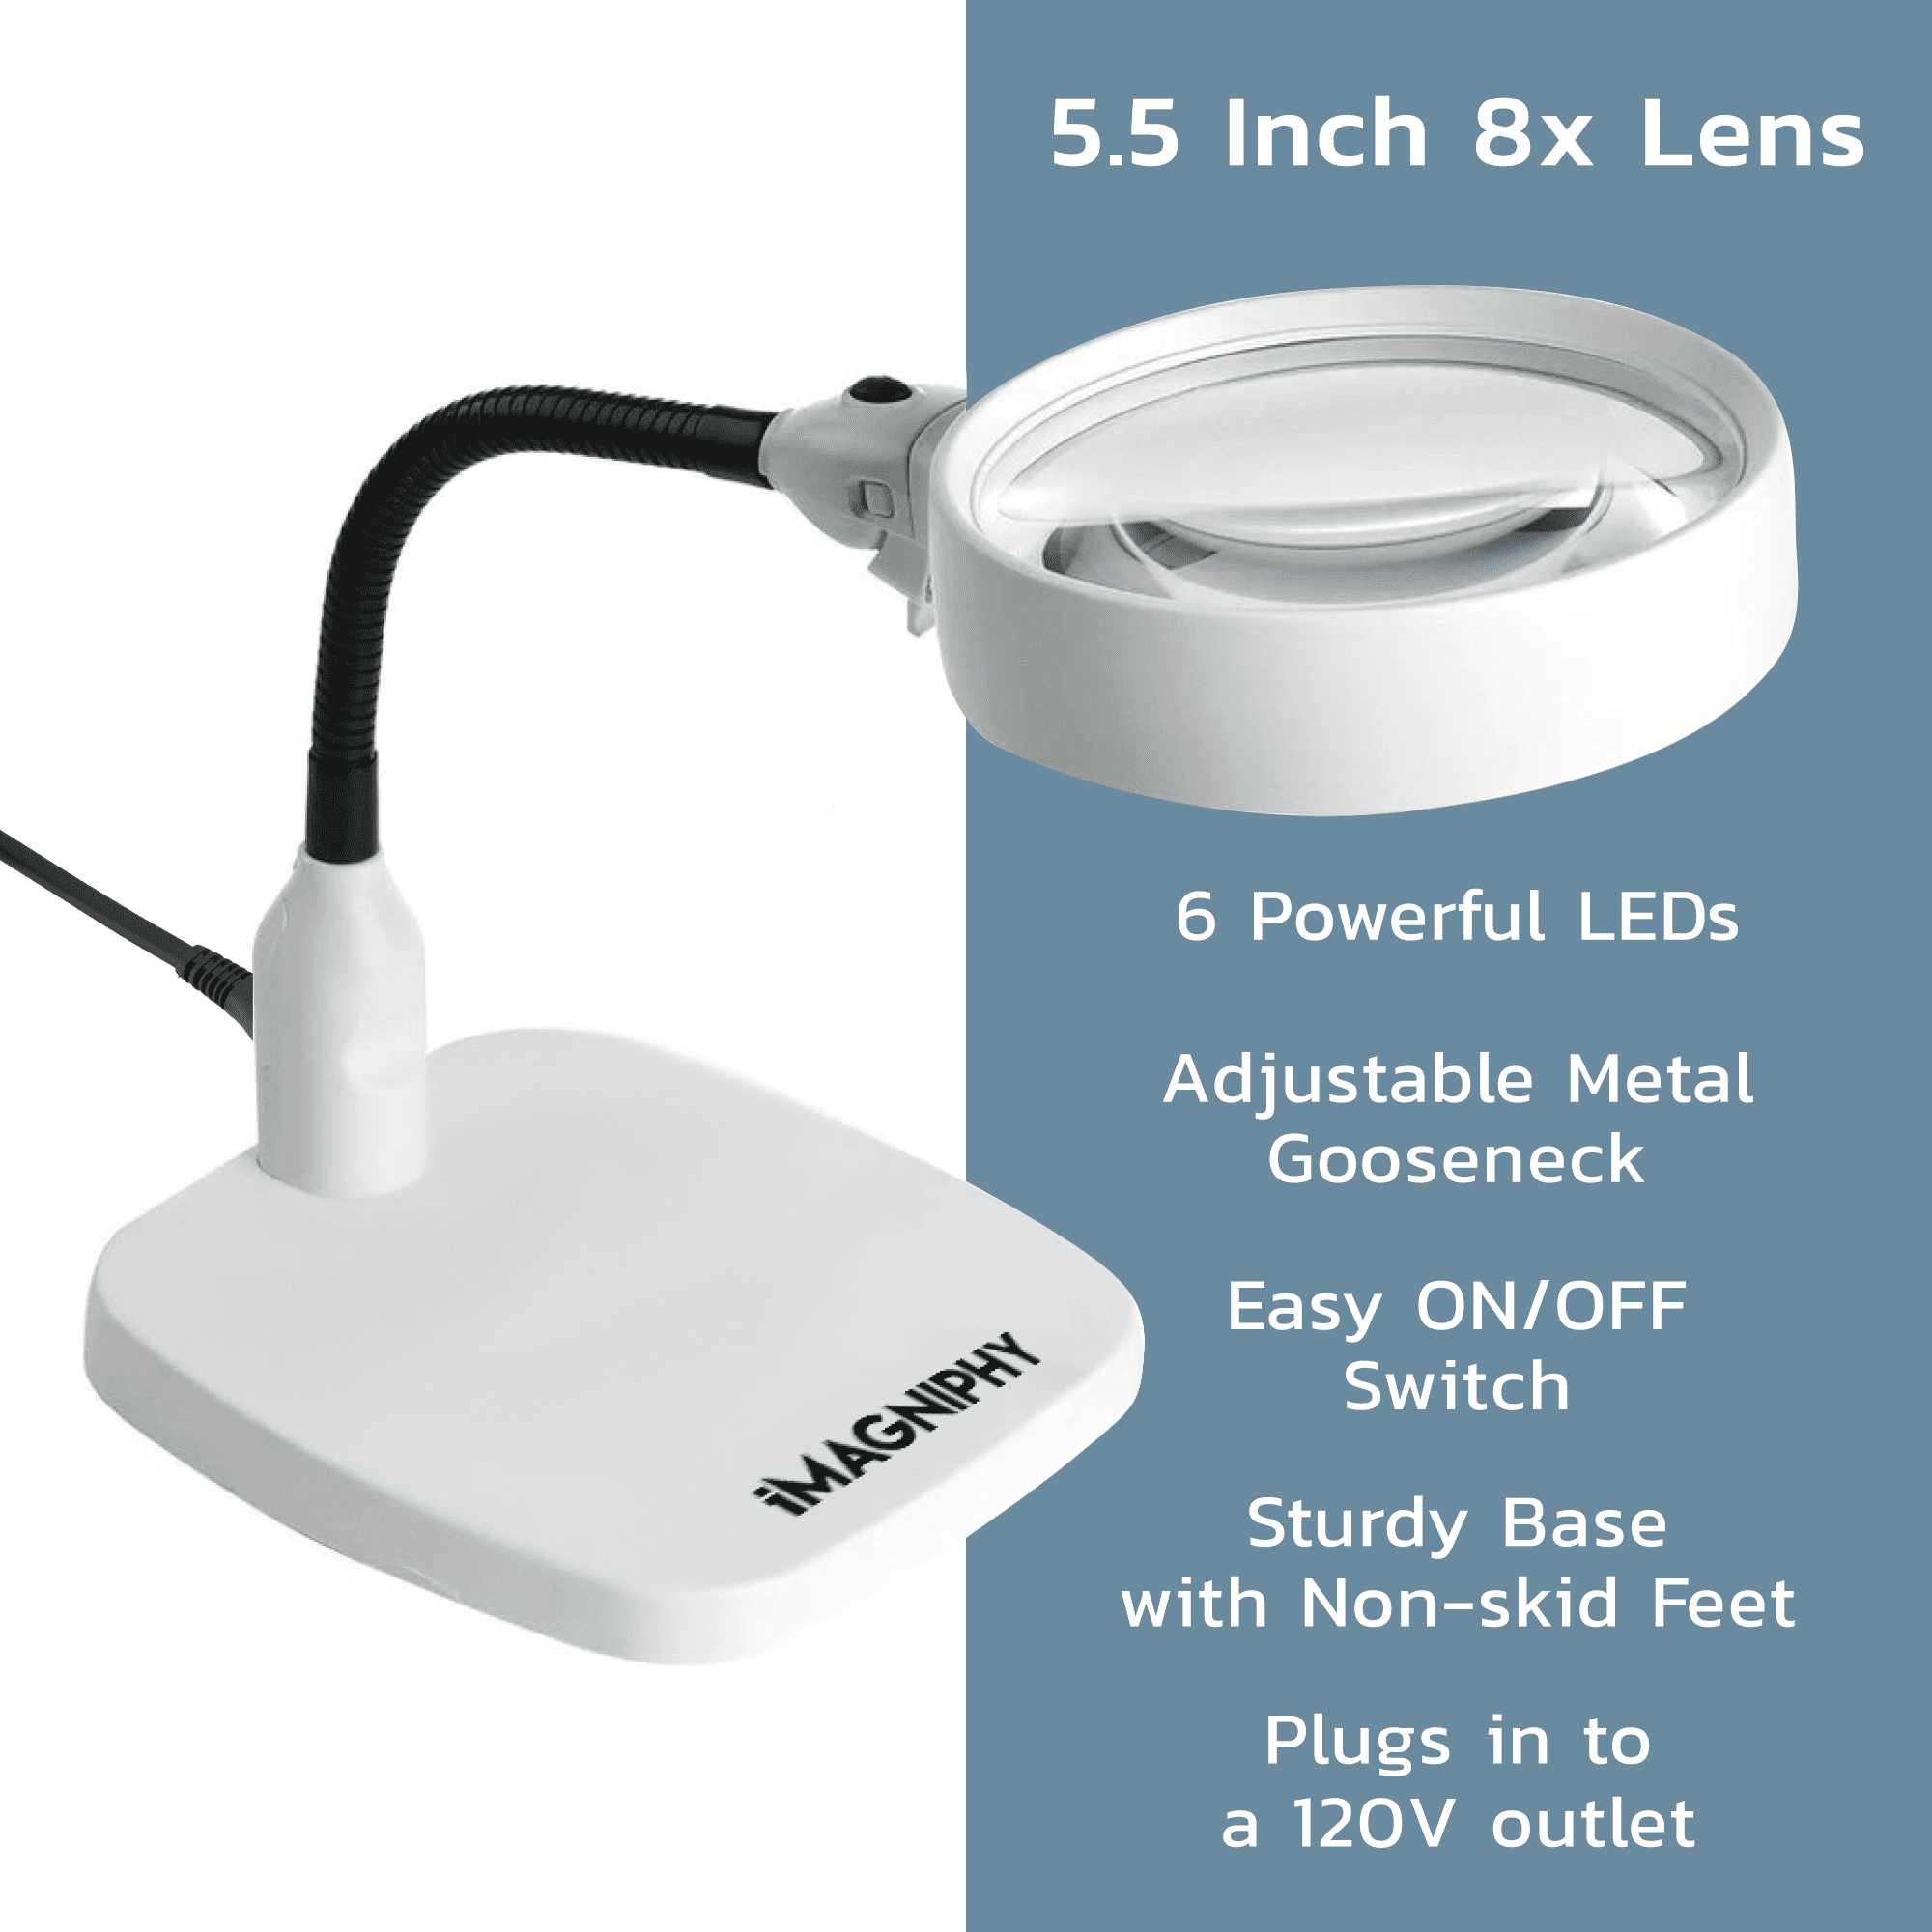 8X Desk Magnifier with Light- Desktop Magnifying Glass with Light and  Stand- Gre